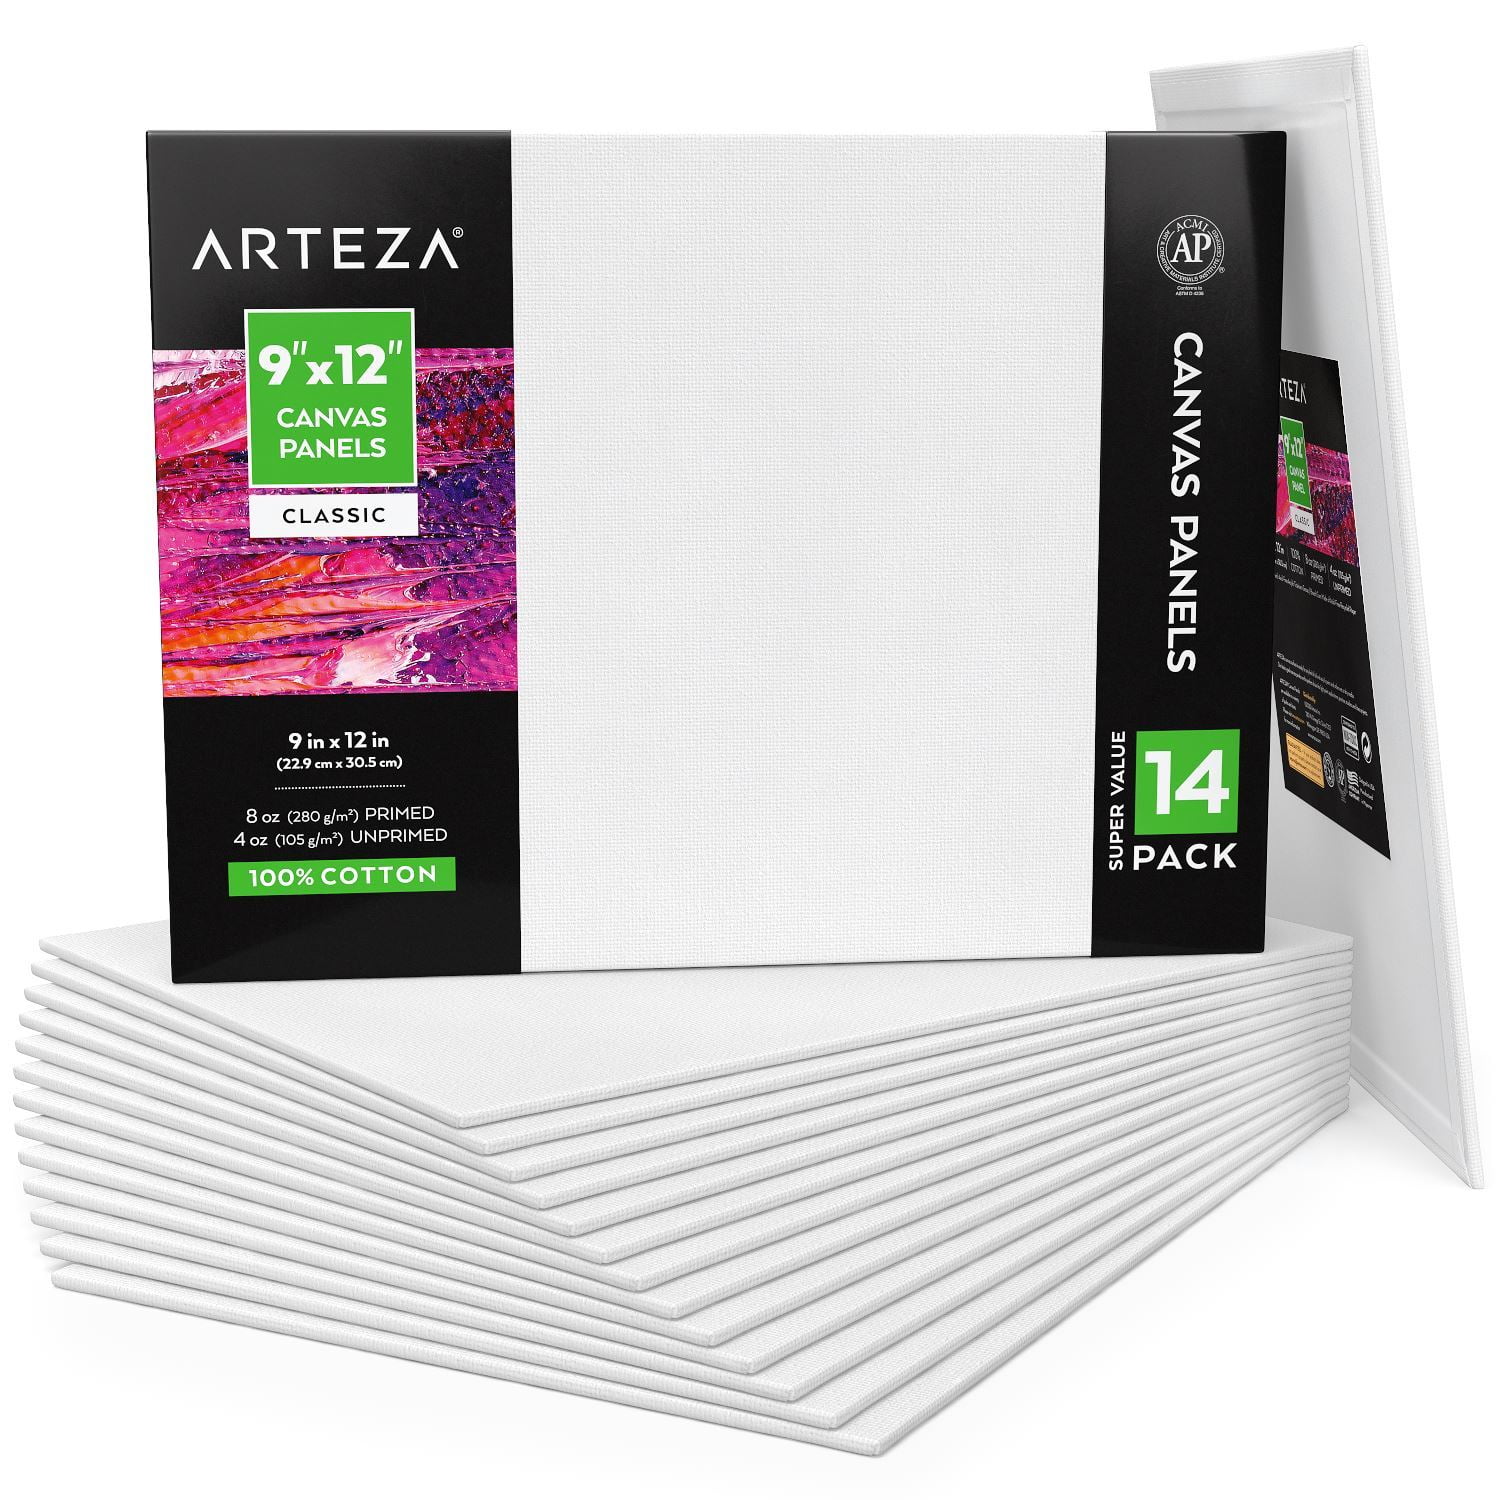 Premium Stretched Canvas 100% Cotton Small Canvases for Painting Using Oil or Acrylic Paint Hobby Painters & Beginner Canvases for Artist 12 Pack, 5 x 7 Inch 10 oz Primed 